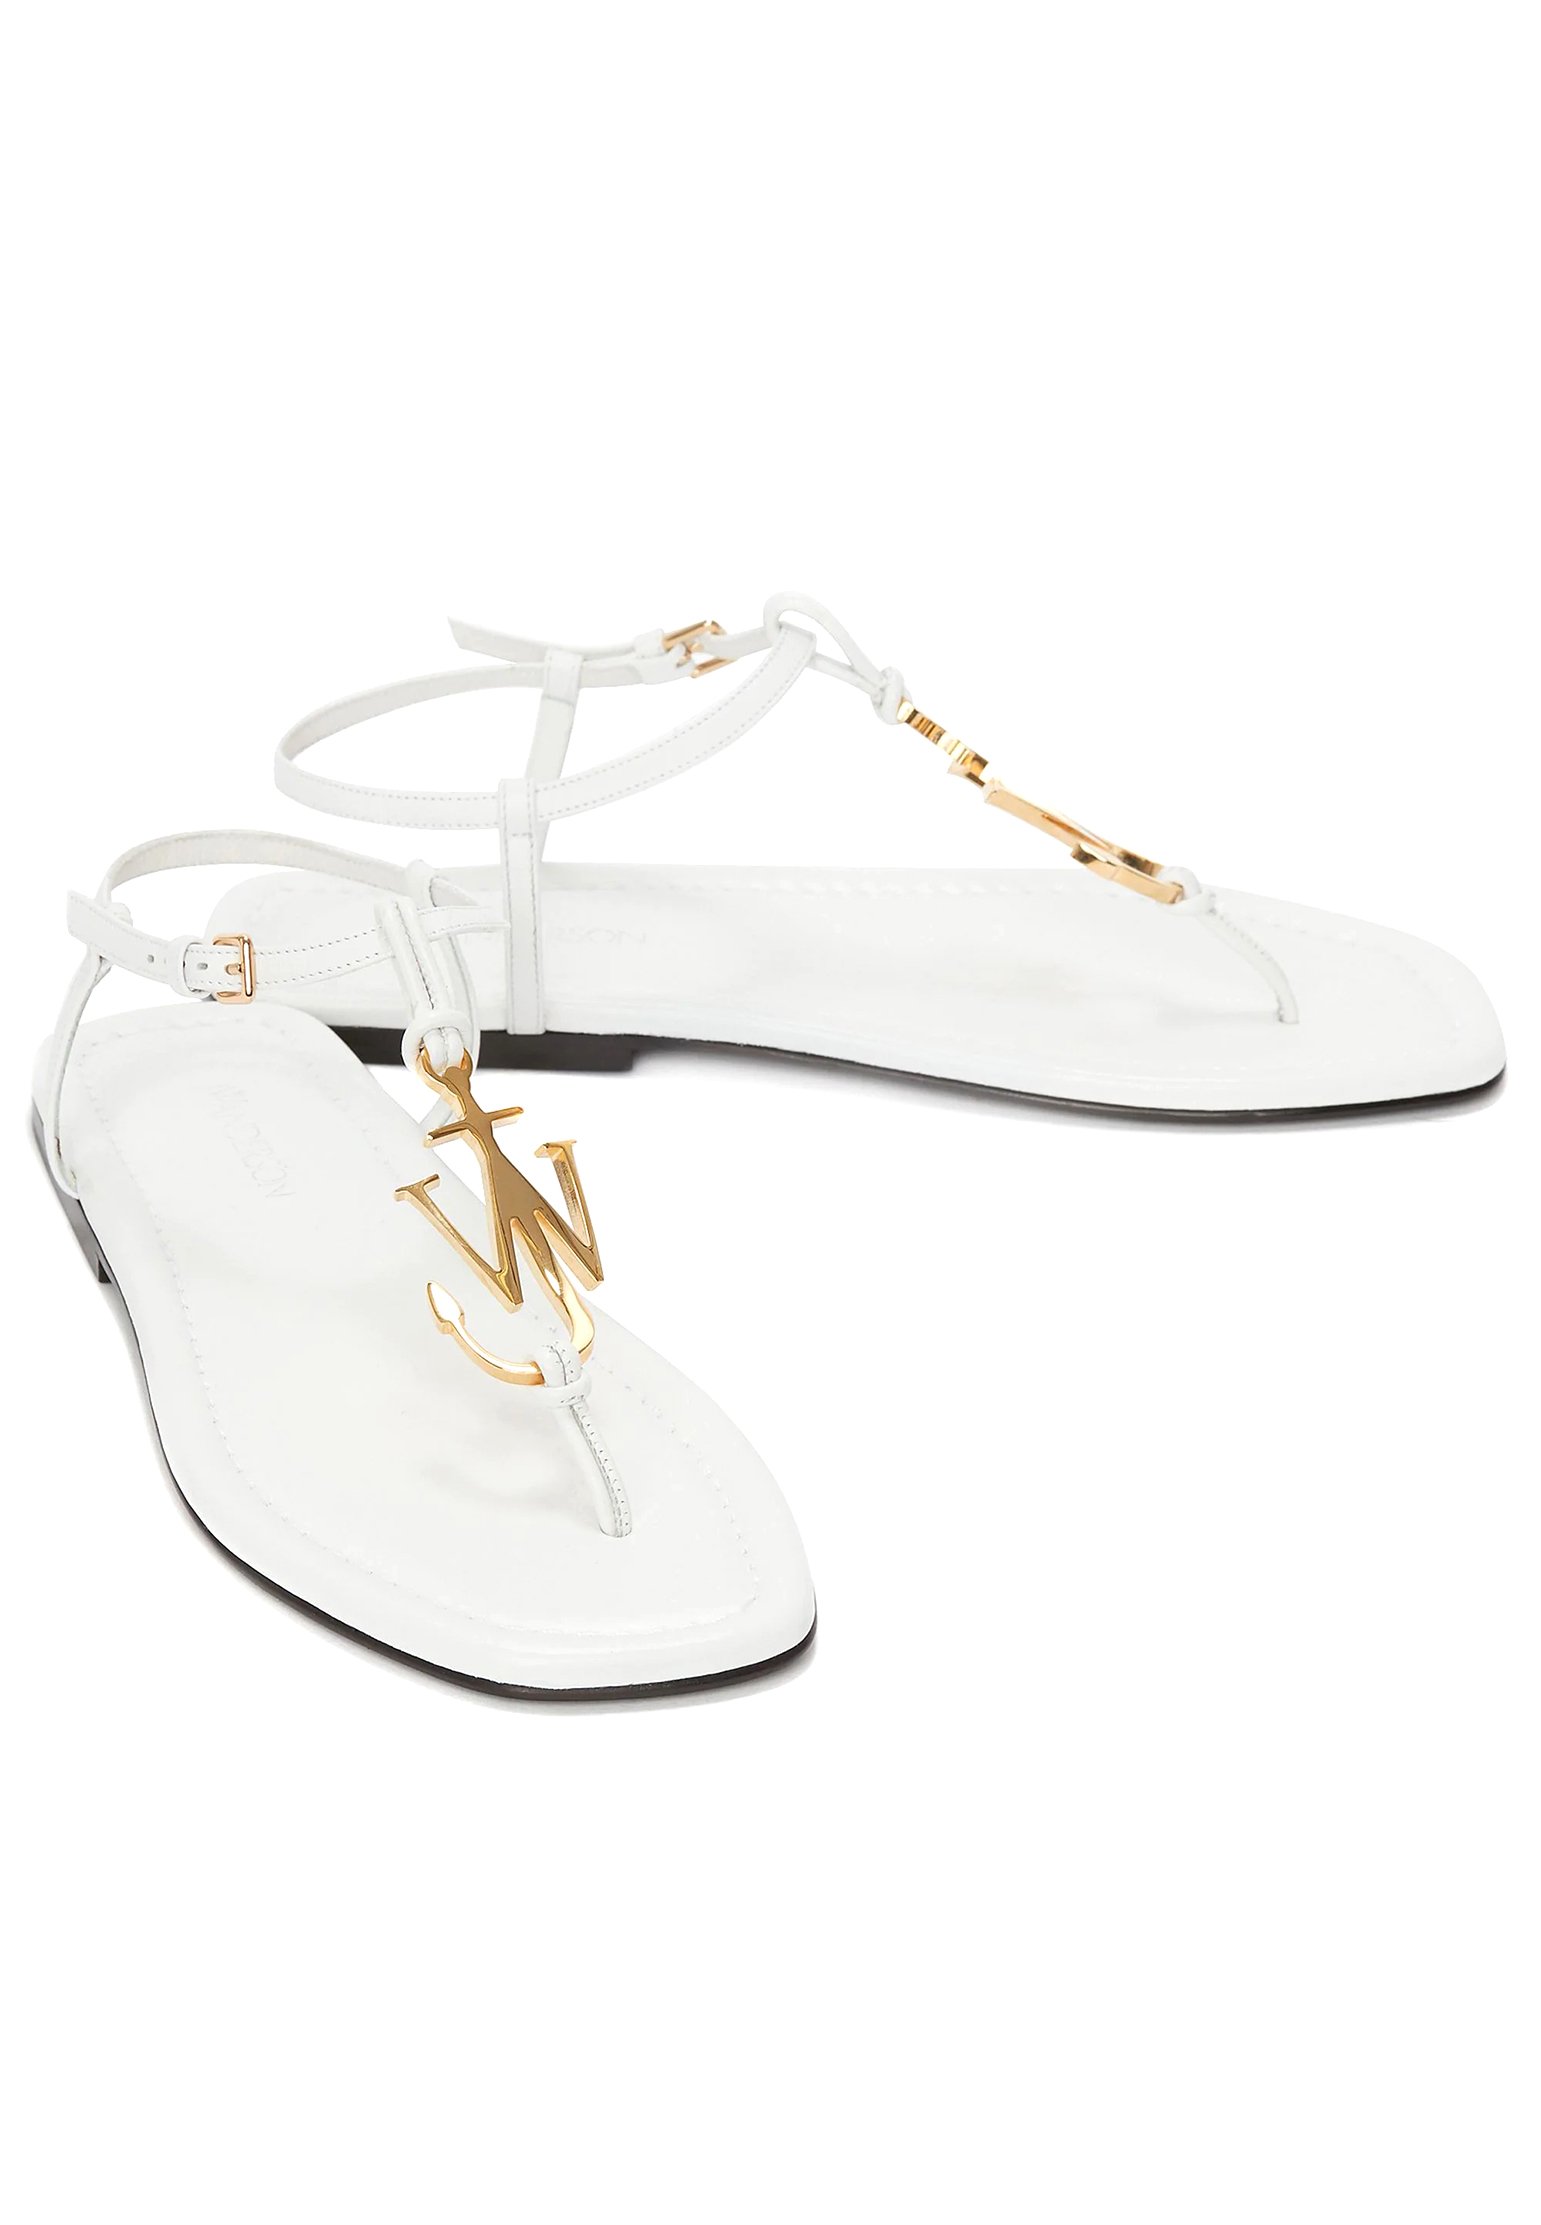 Sandals J.W. ANDERSON Color: white (Code: 736) in online store Allure